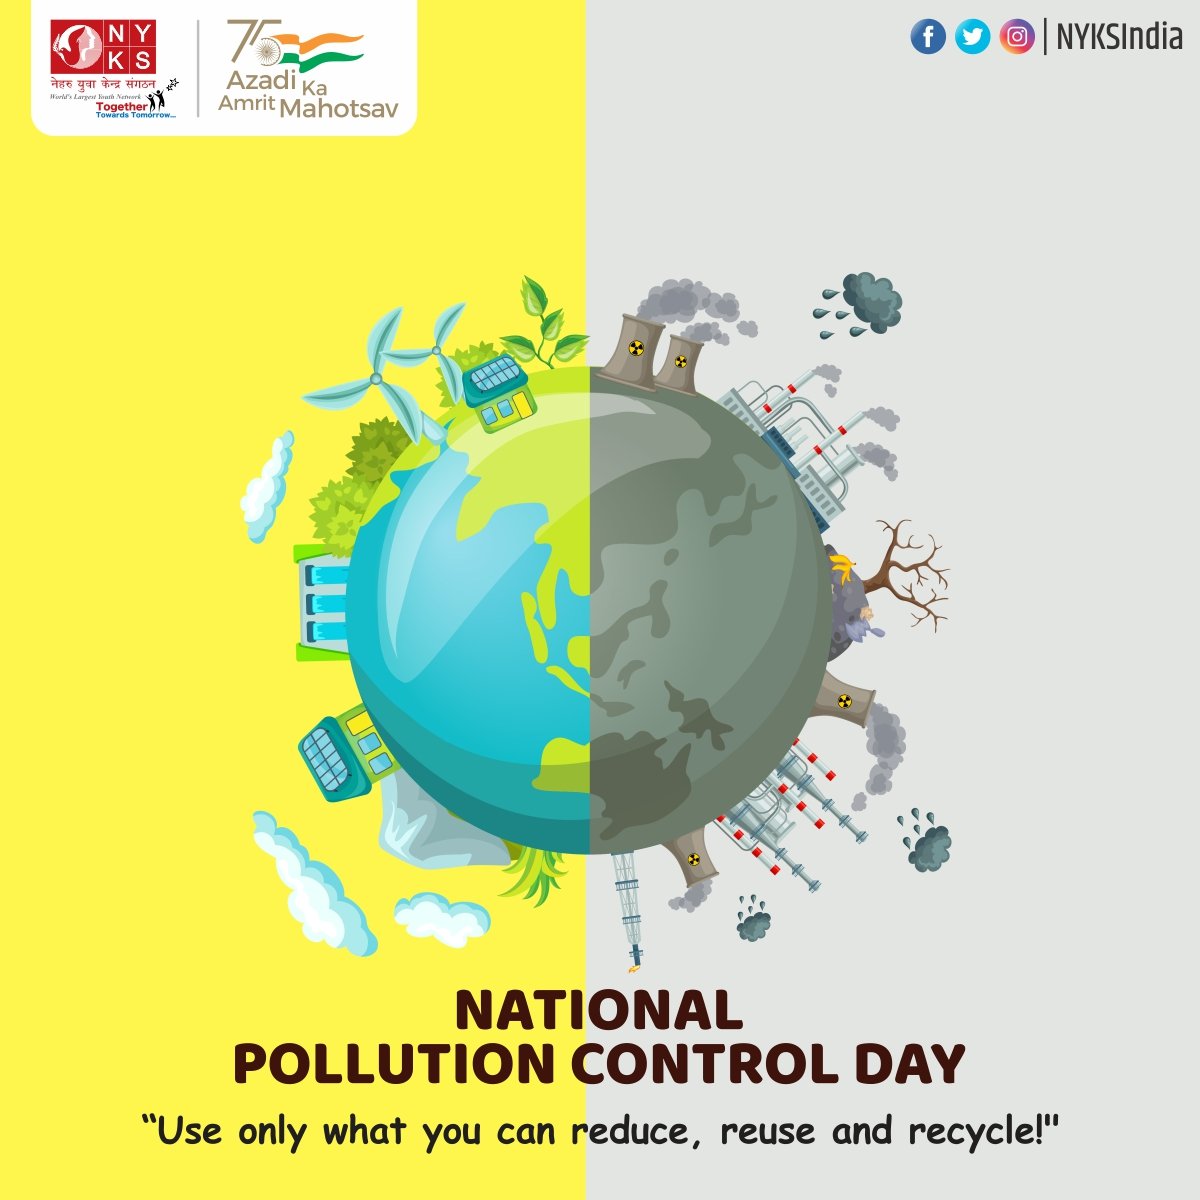 Let us save our environment from the poison of pollution...Let us raise awareness about pollution control on #NationalPollutionControlDay.

#PollutionControlDay #pollution #NationalPollutionControlDay2022